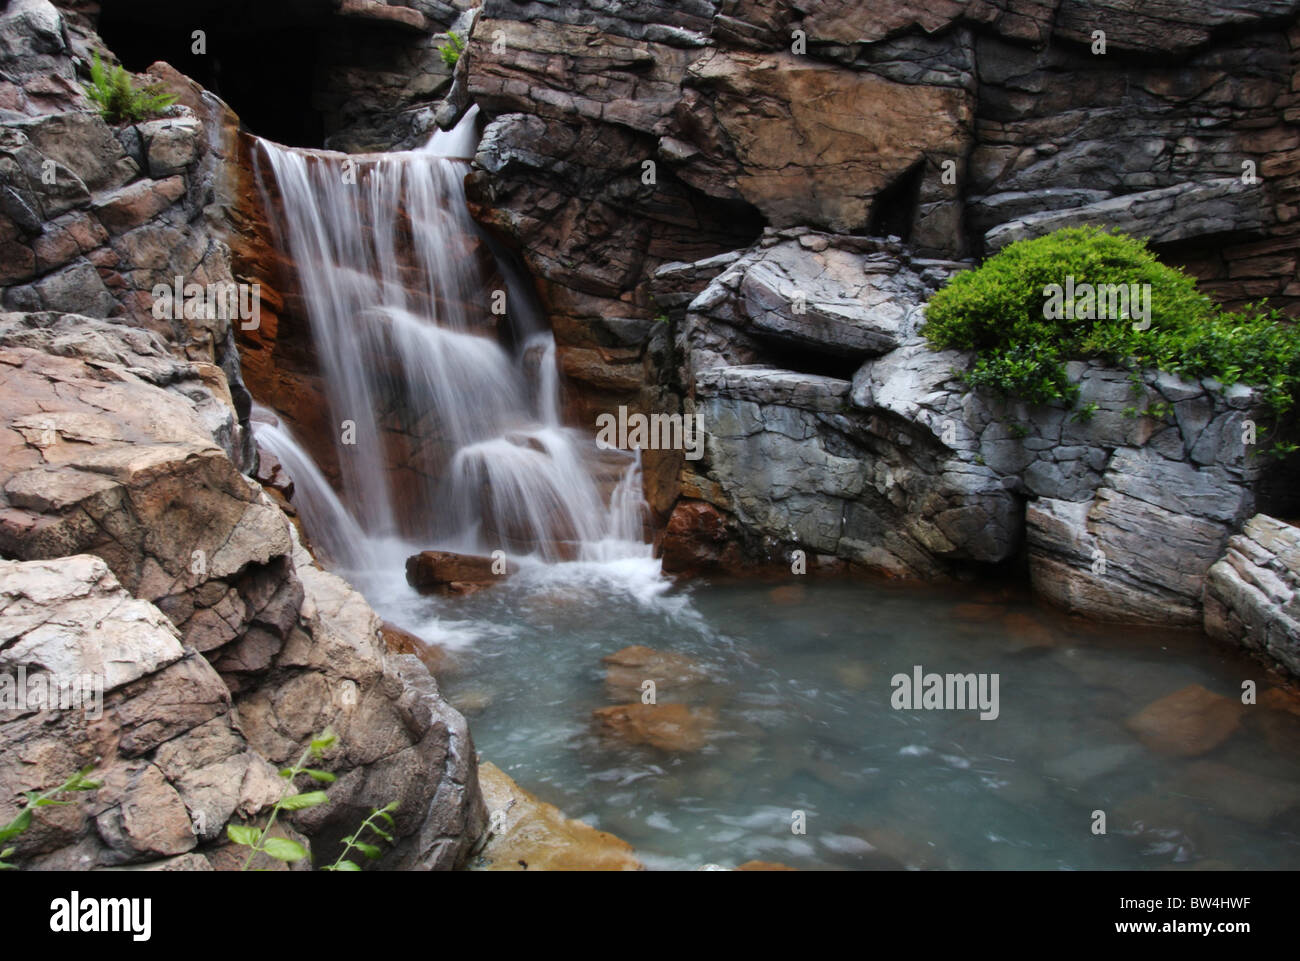 A Waterfall Over Rocks Taken With A Slow Shutter Speed To Cause The